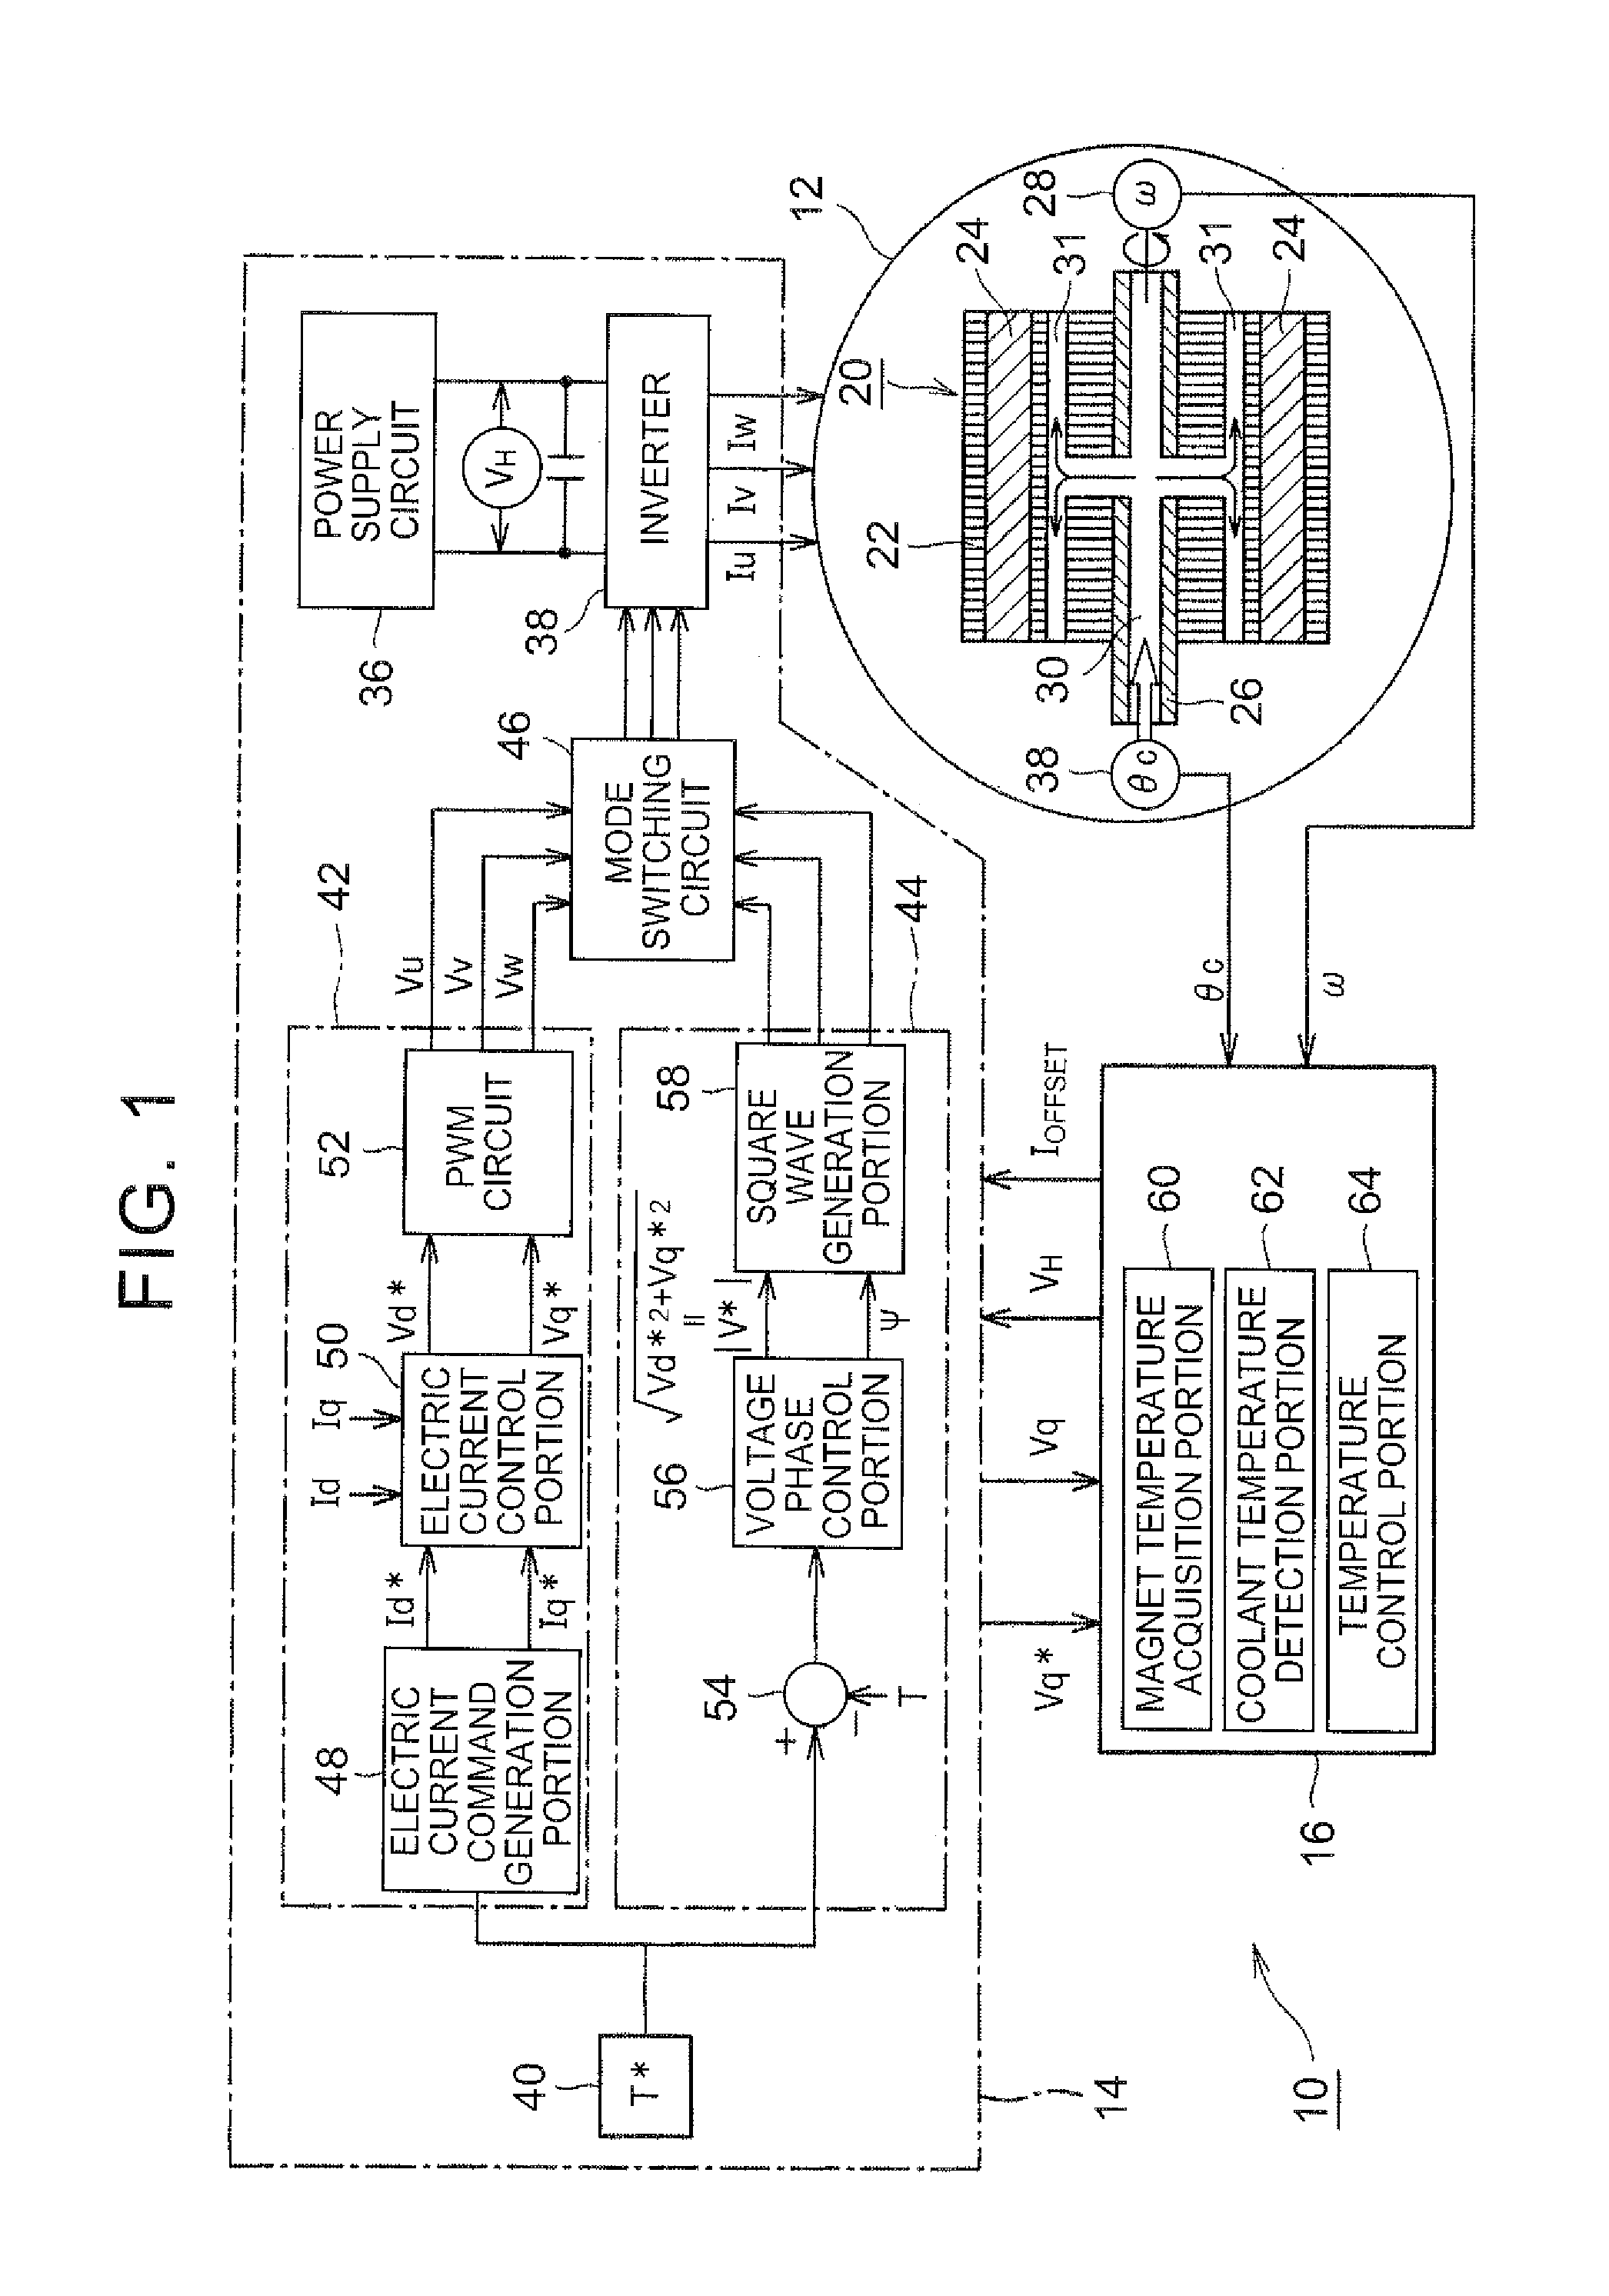 Control apparatus for rotary electric machine, rotary electric machine drive system, and control method for rotary electric machine